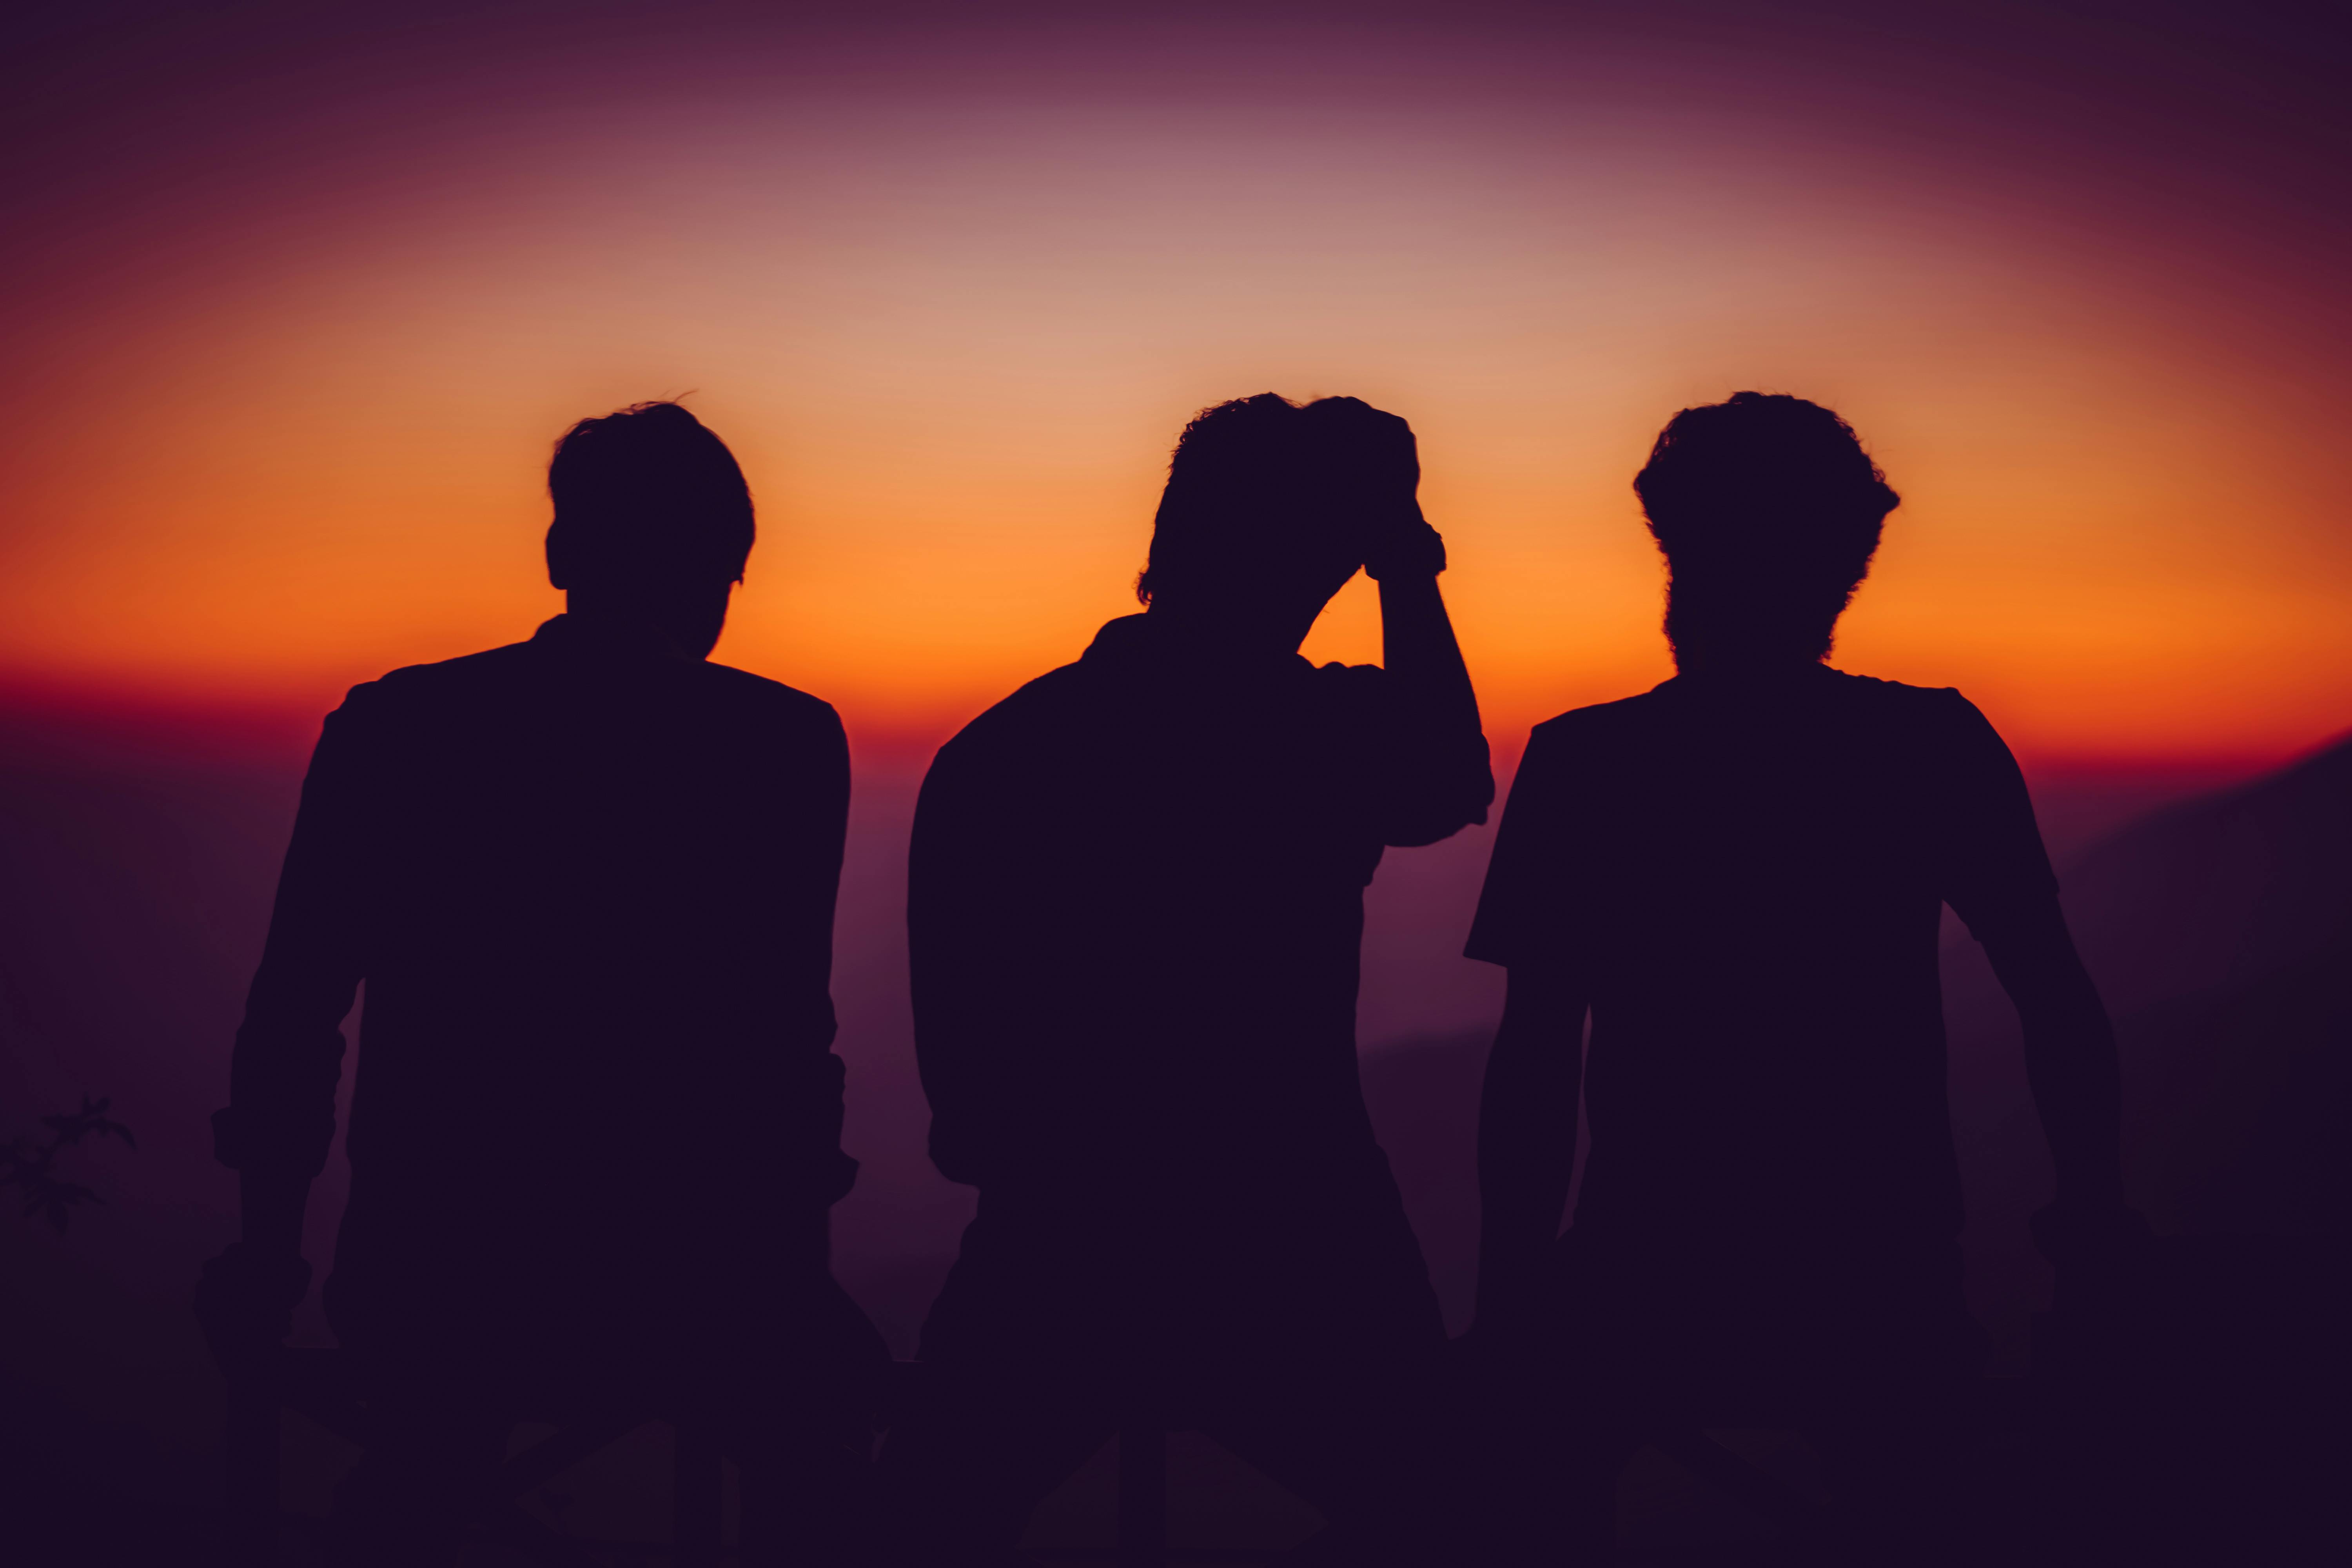 Silhouette of a Boys Profile against Sunset Sky · Free Stock Photo